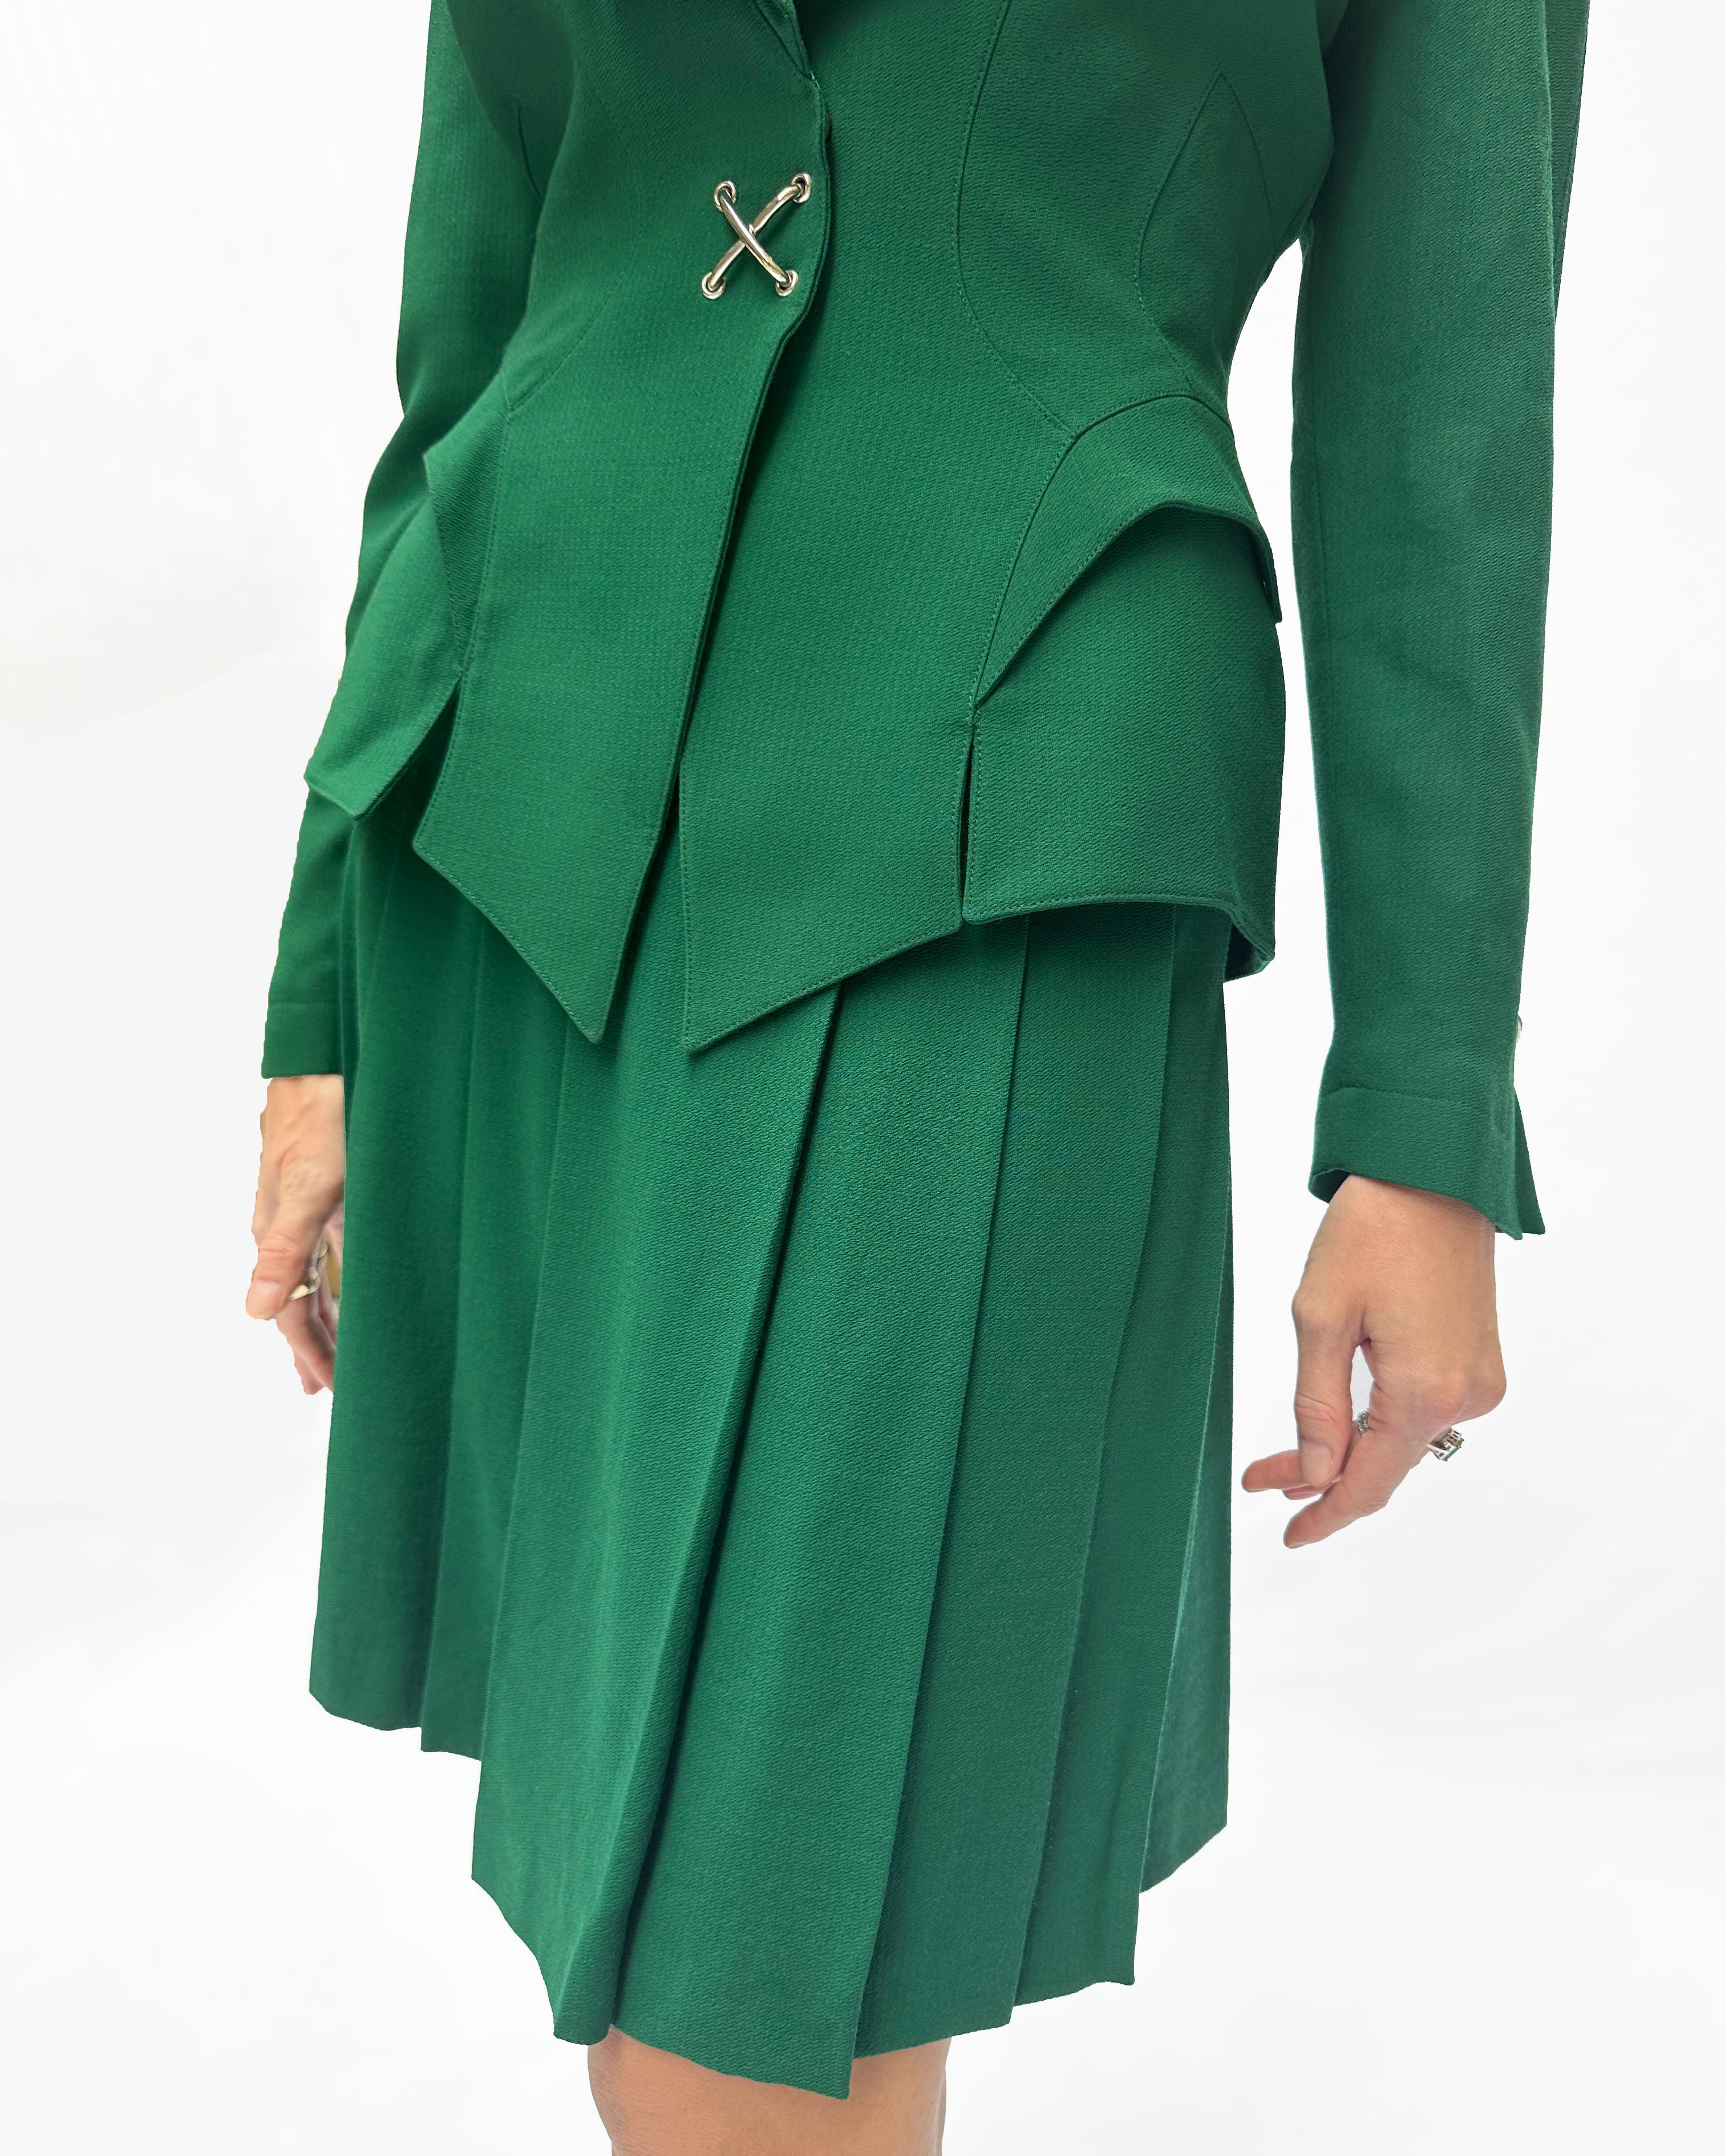 Vintage Thierry Mugler Fall 1992 Emerald Jacket + Pleated Skirt Suit For Sale 2